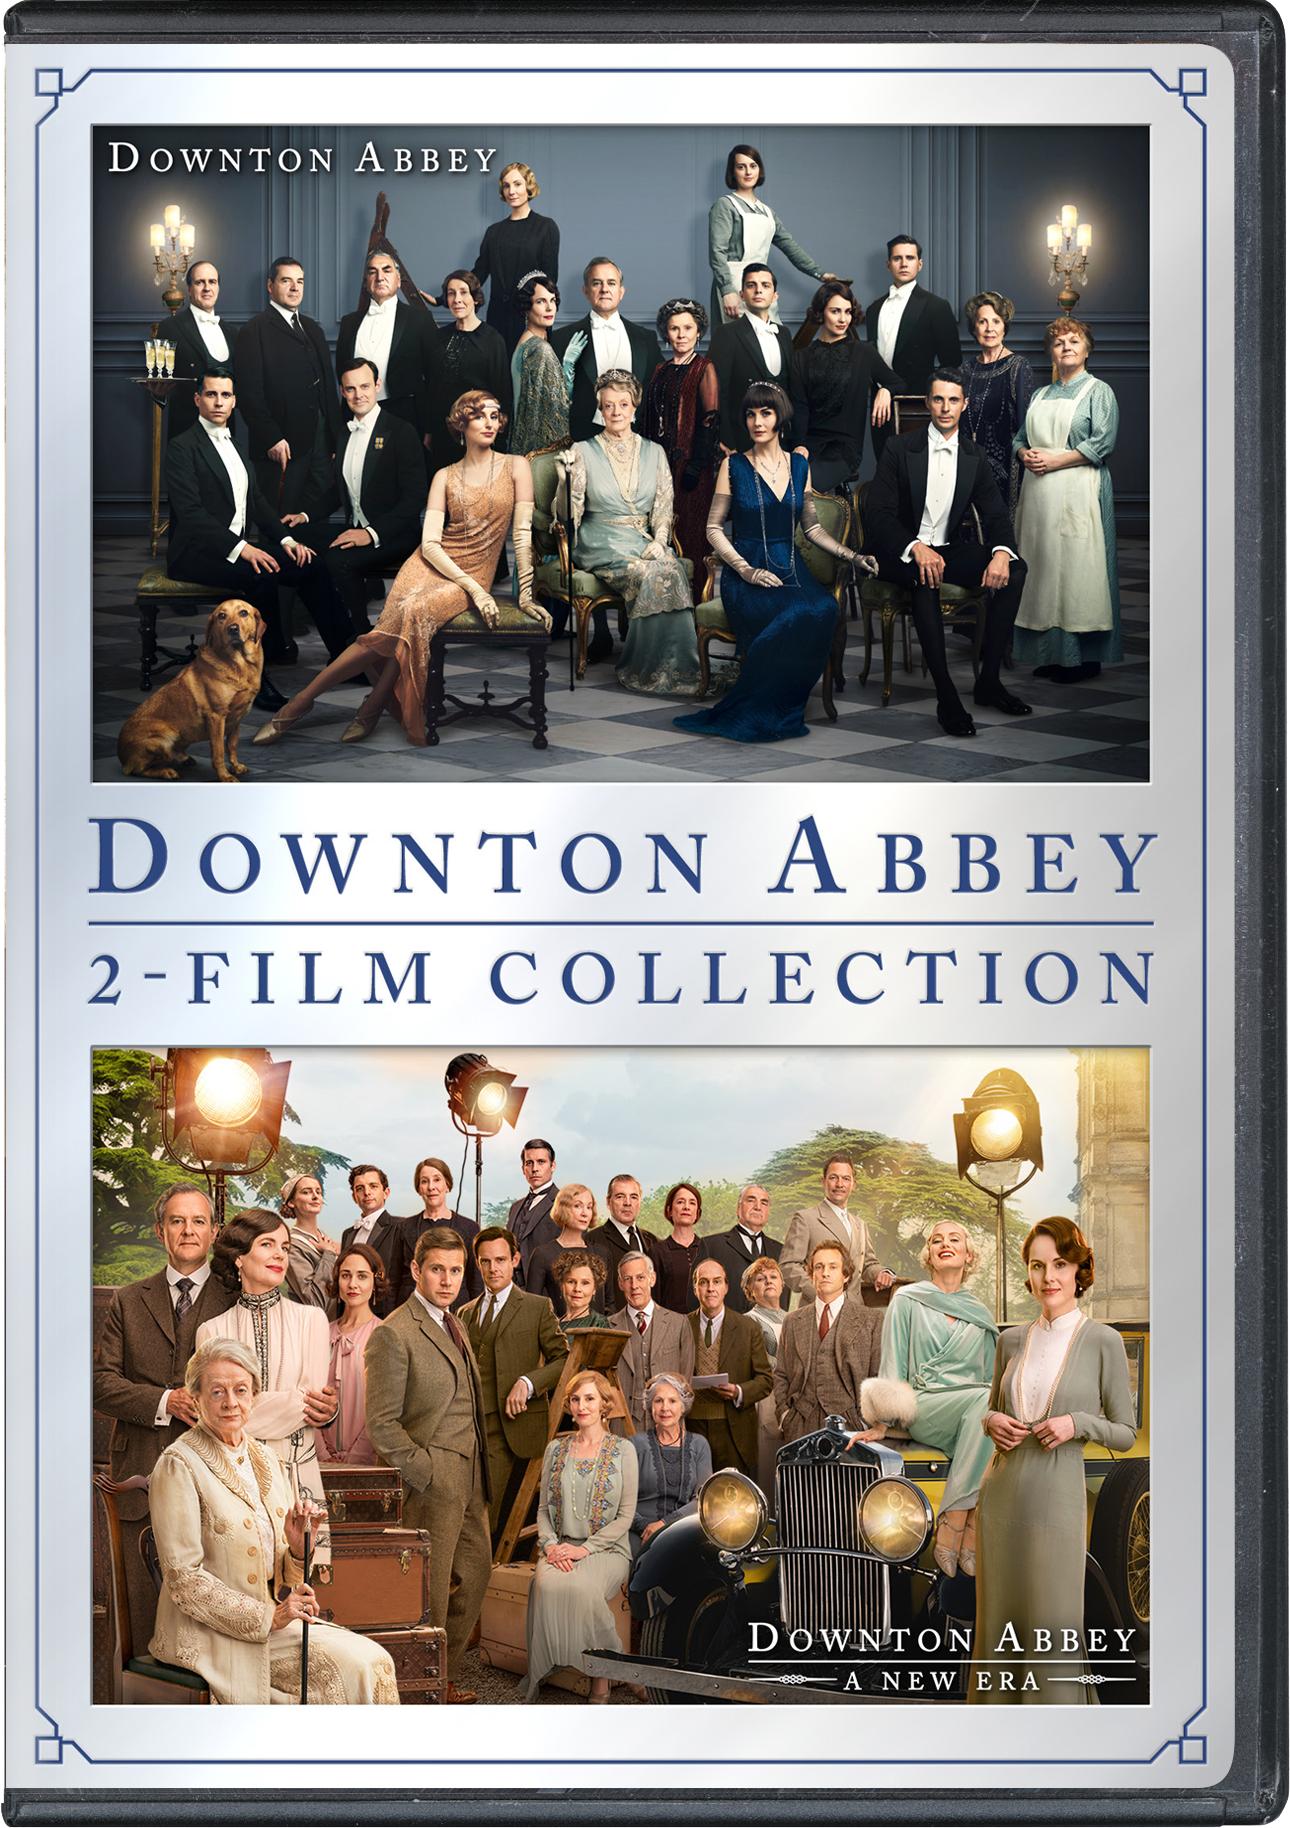 Downton Abbey: The Movie/Downton Abbey: A New Era (DVD Double Feature) - DVD   - Drama Movies On DVD - Movies On GRUV